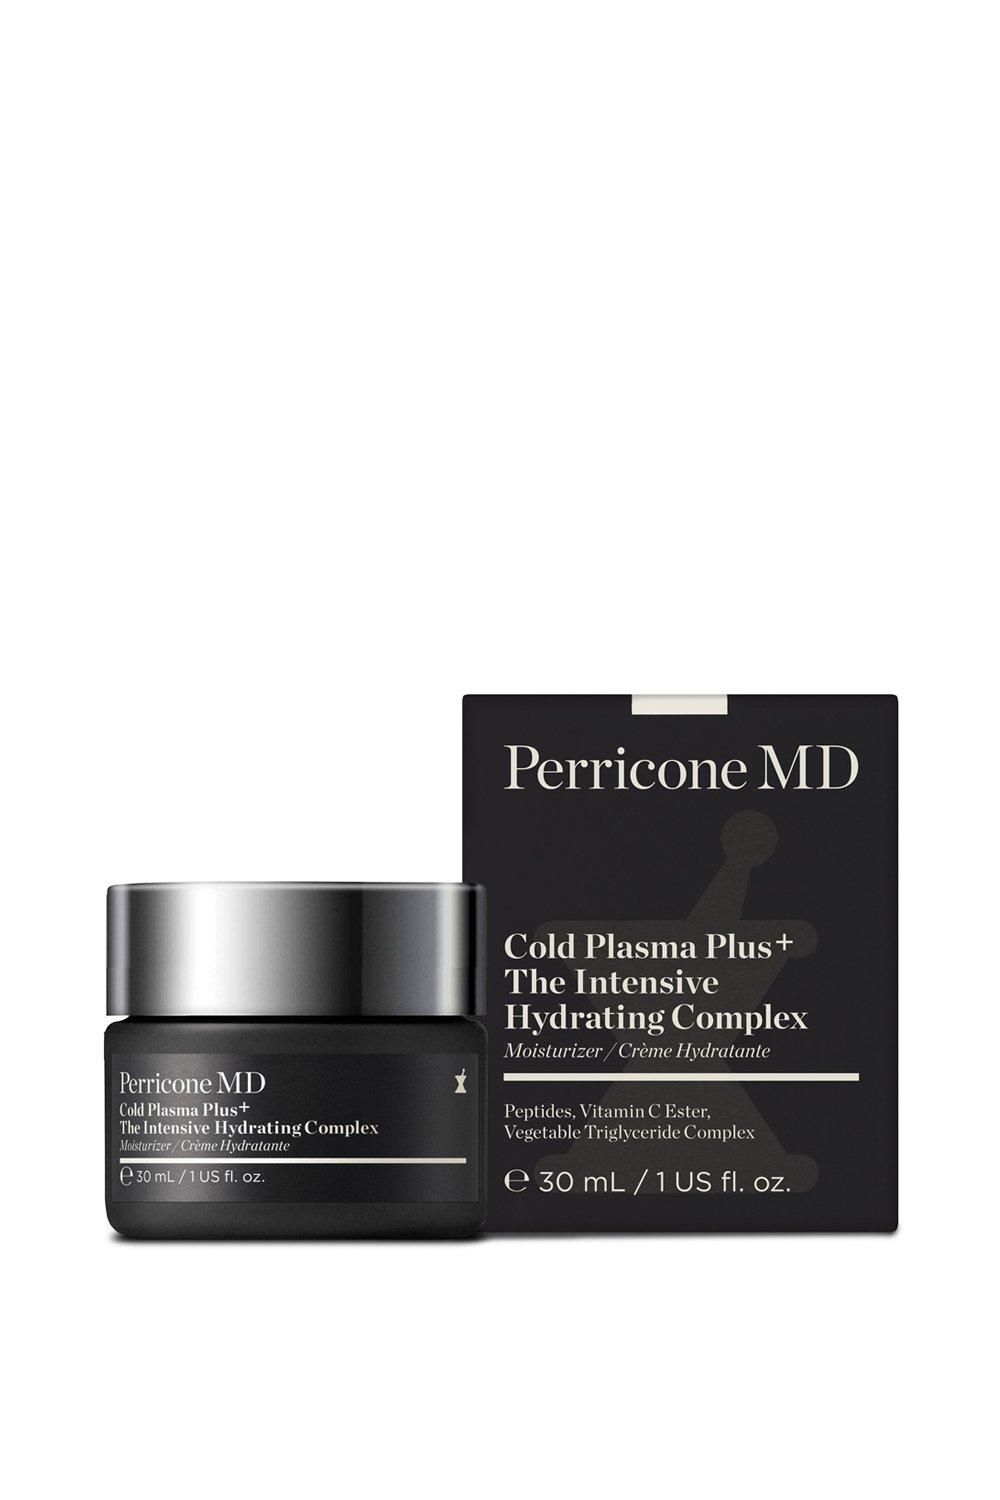 Cold Plasma Plus+ The Intensive Hydrating Complex - Travel